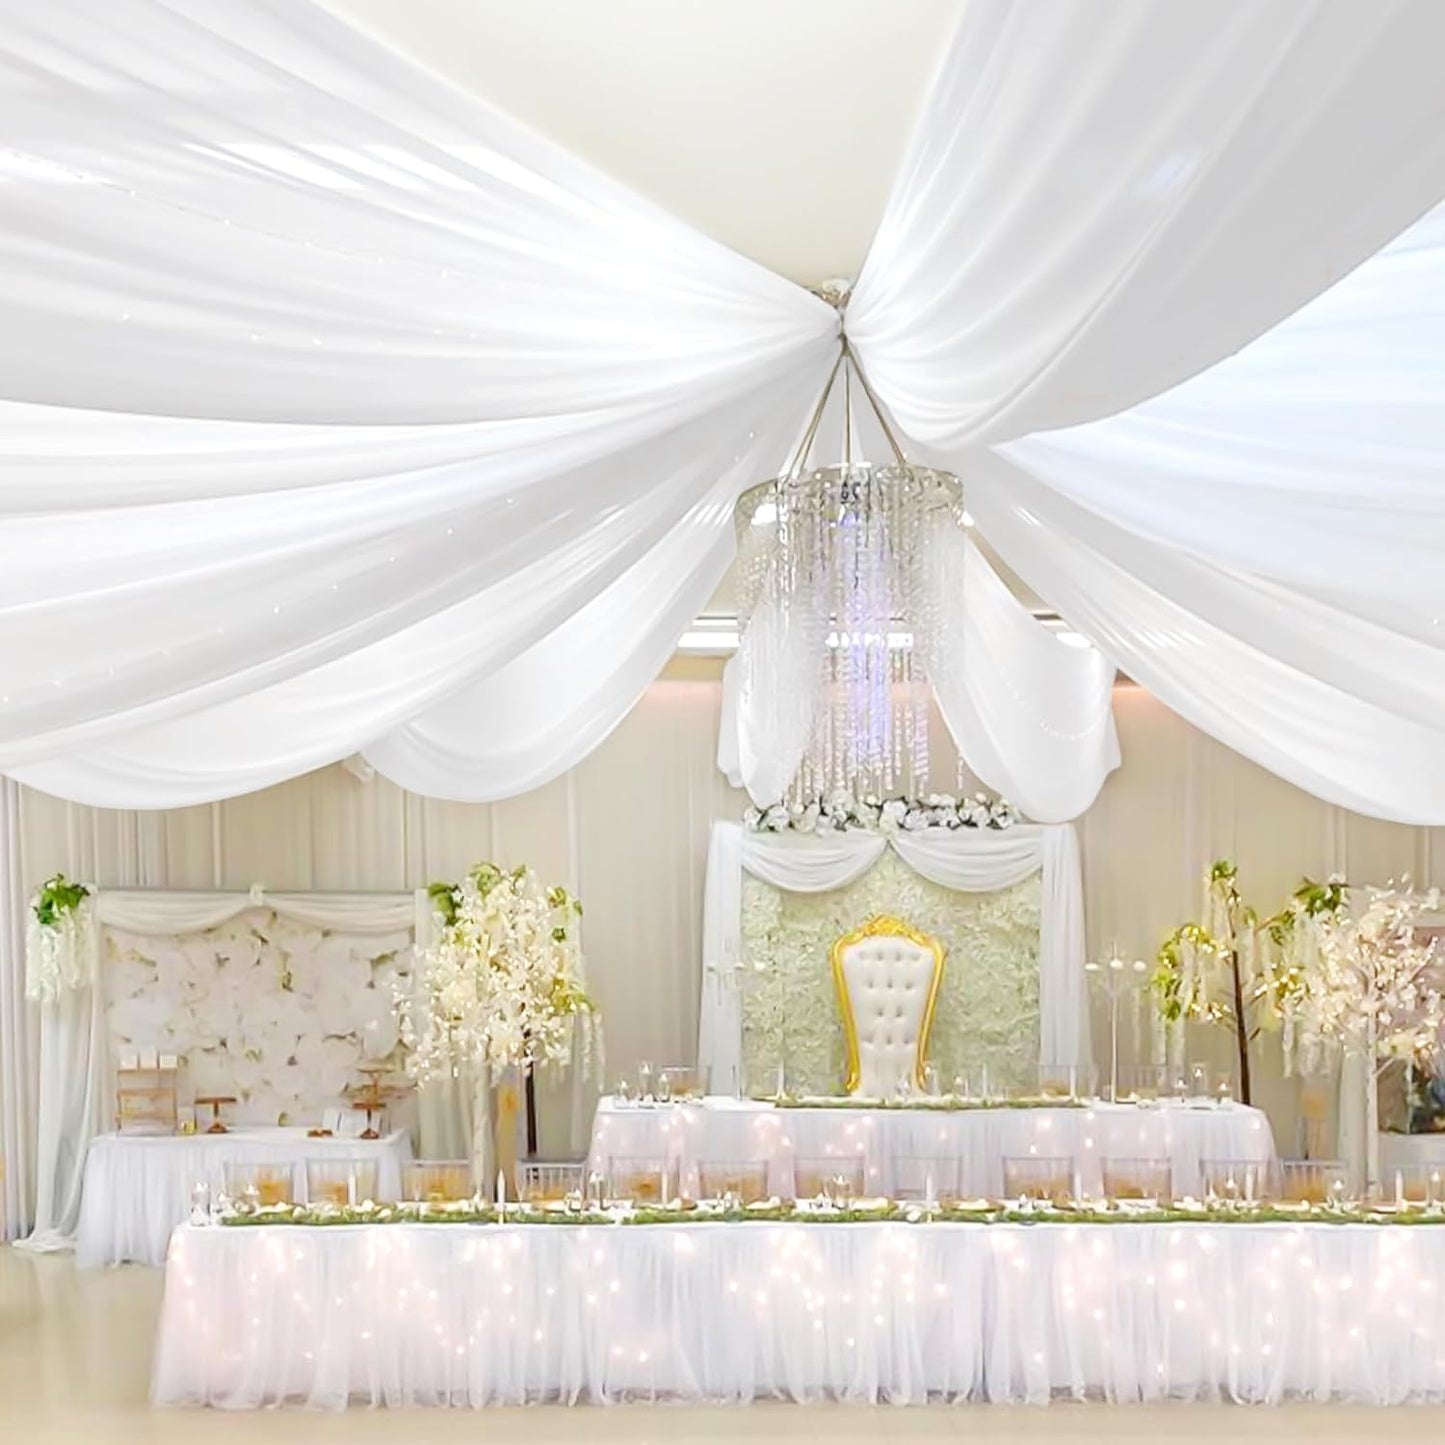 6 Panels White Ceiling Drapes for Wedding Ceiling Drapes 5Ftx20Ft Wedding Arch Draping Fabric Sheer Curtains Voile Chiffon Drapery Draping Wedding Ceiling Decorations for Party Ceremony Stage Swag  Showgeous White 2 Panel-5Ftx15Ft(60"Wx180"L) 